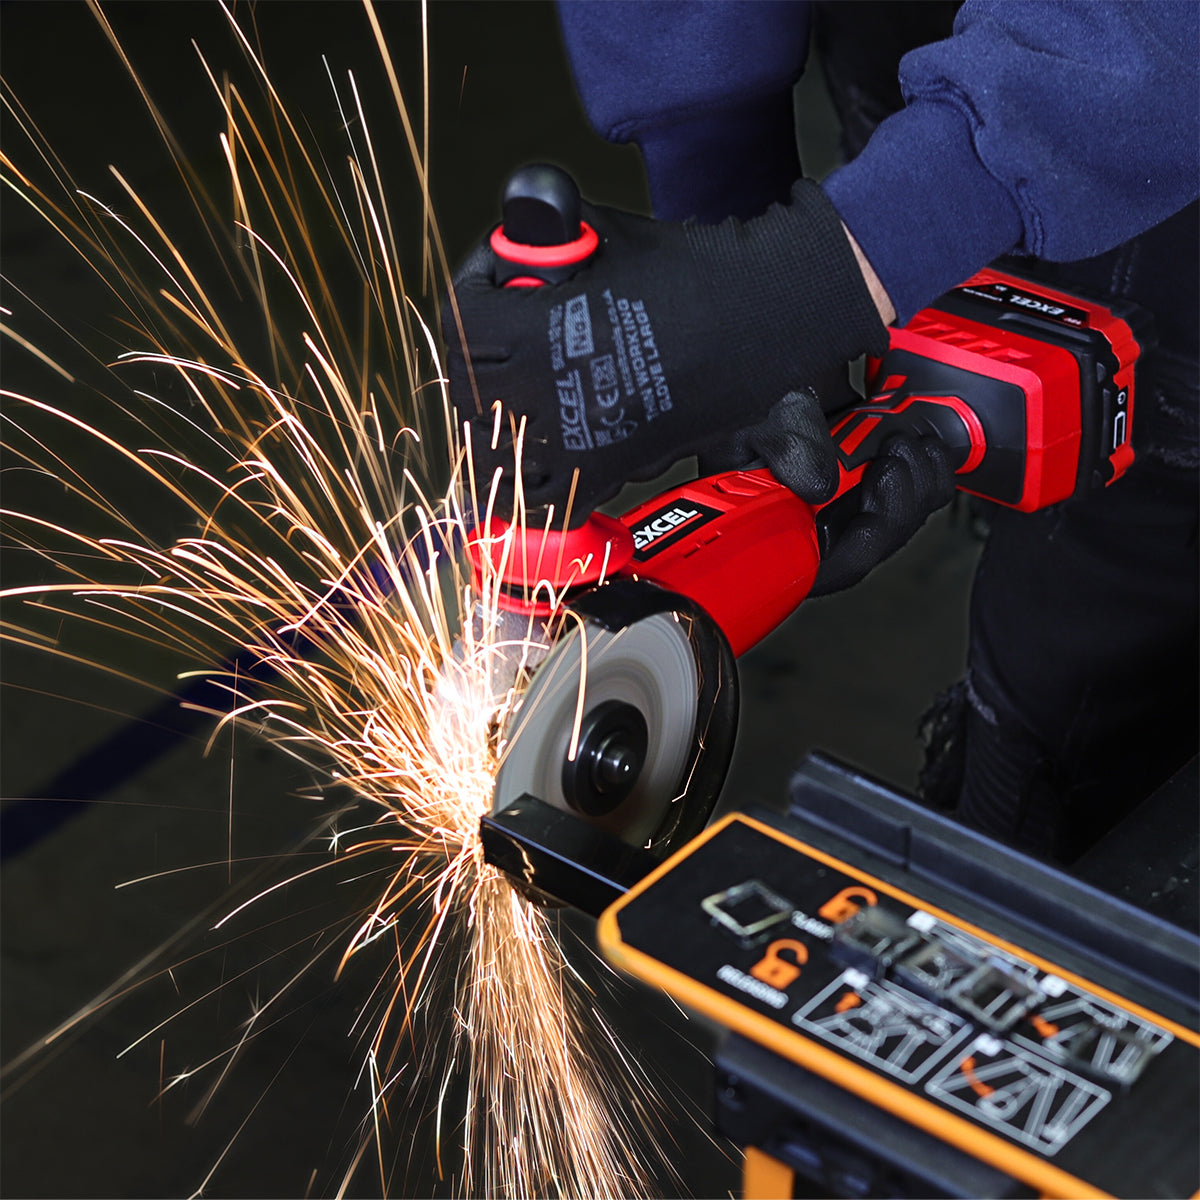 Excel 18V Cordless Angle Grinder 115mm with 2 x 5.0Ah Battery & Charger EXL276